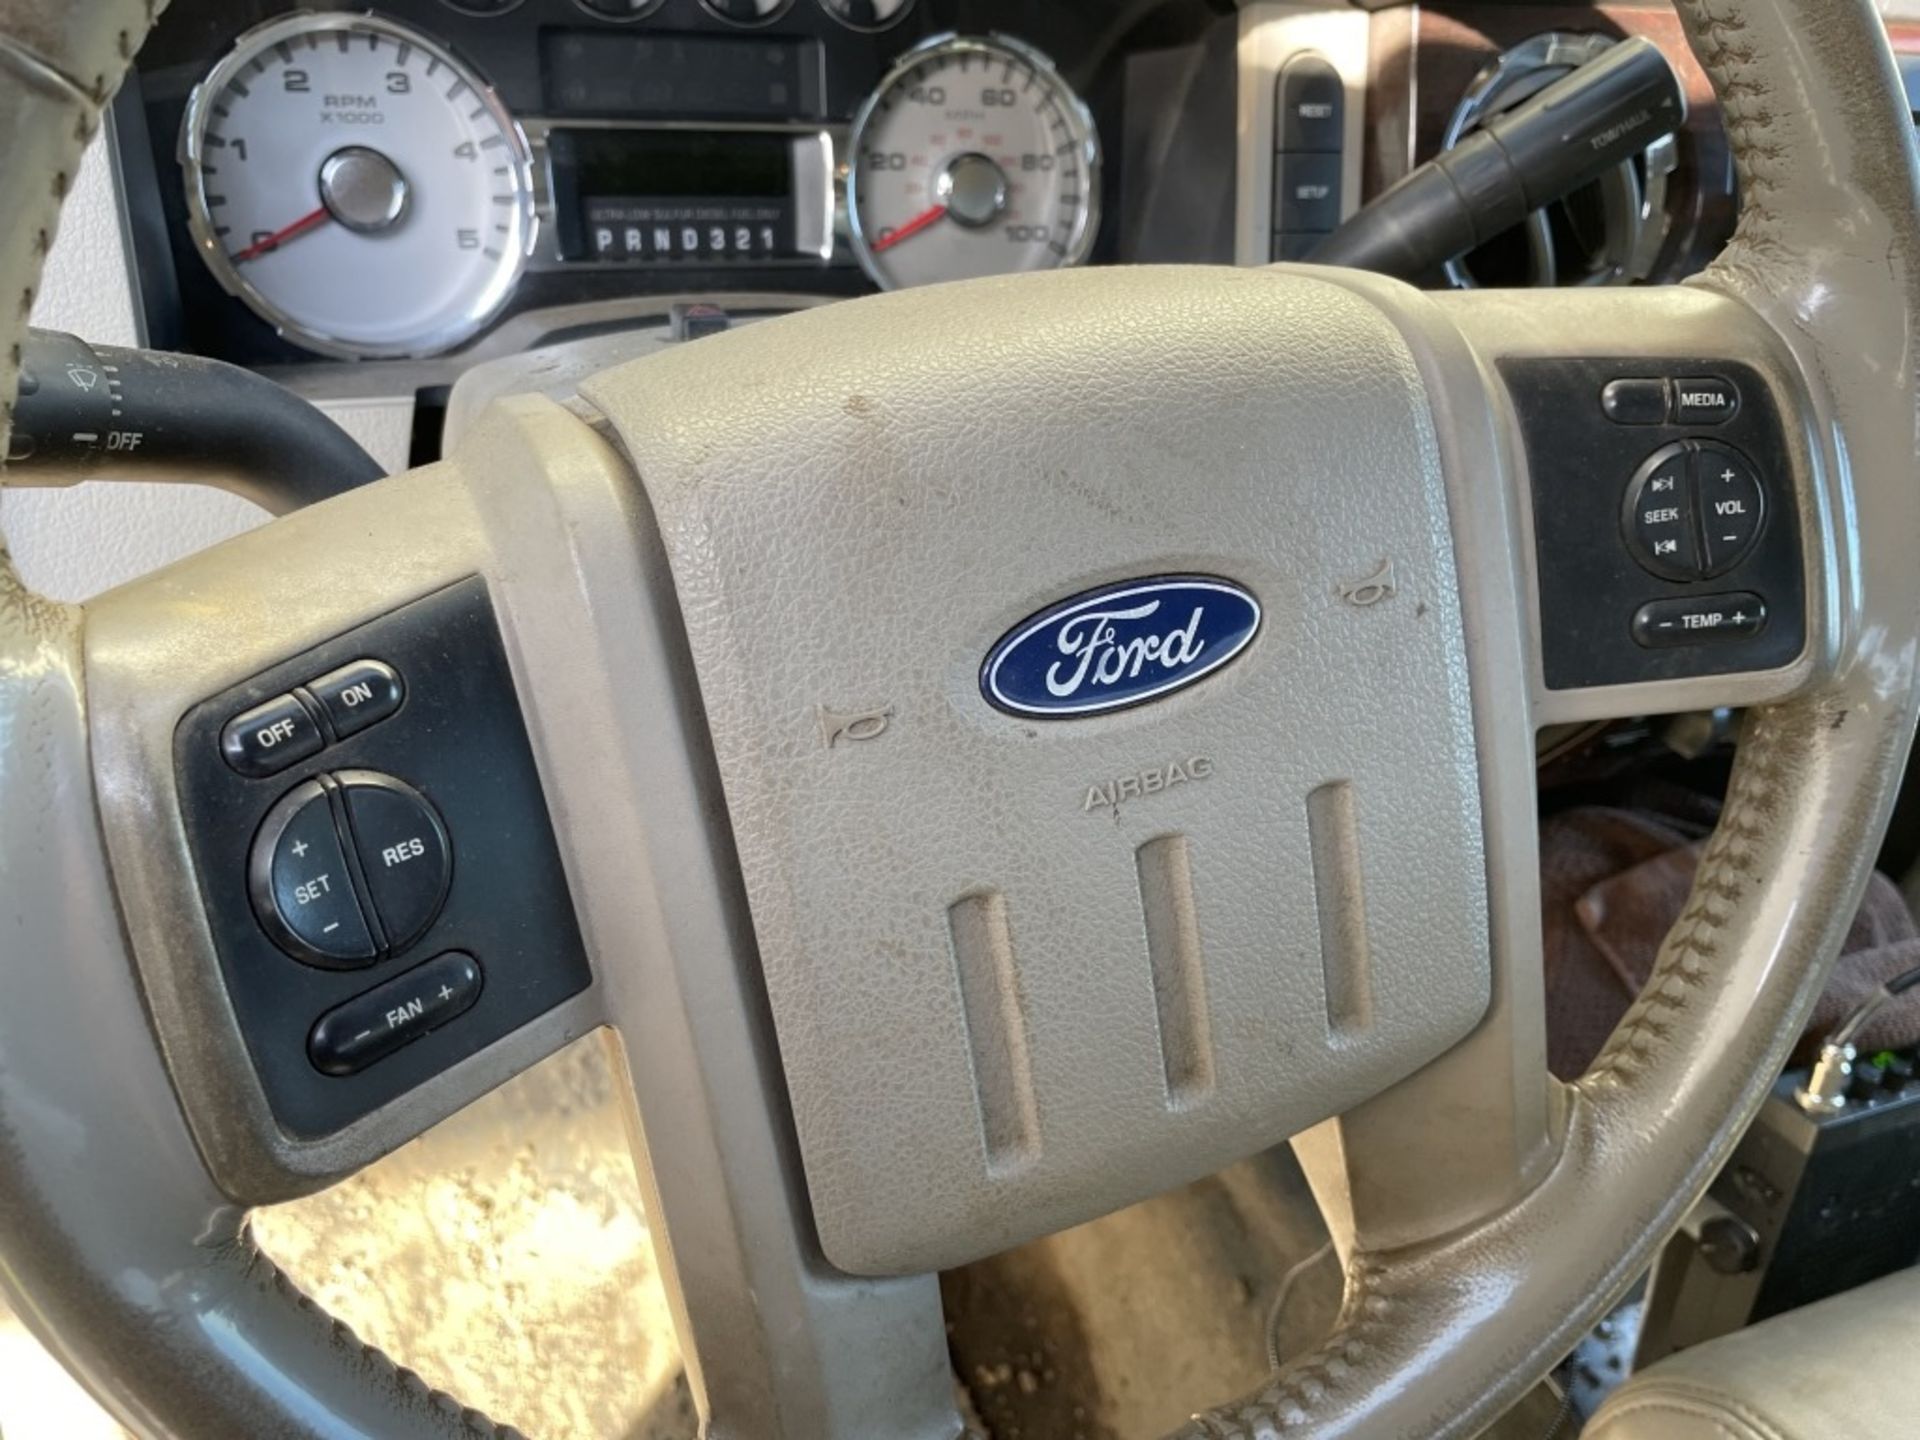 2008 Ford F350 SD 4x4 Extra Cab Pickup - Image 19 of 26